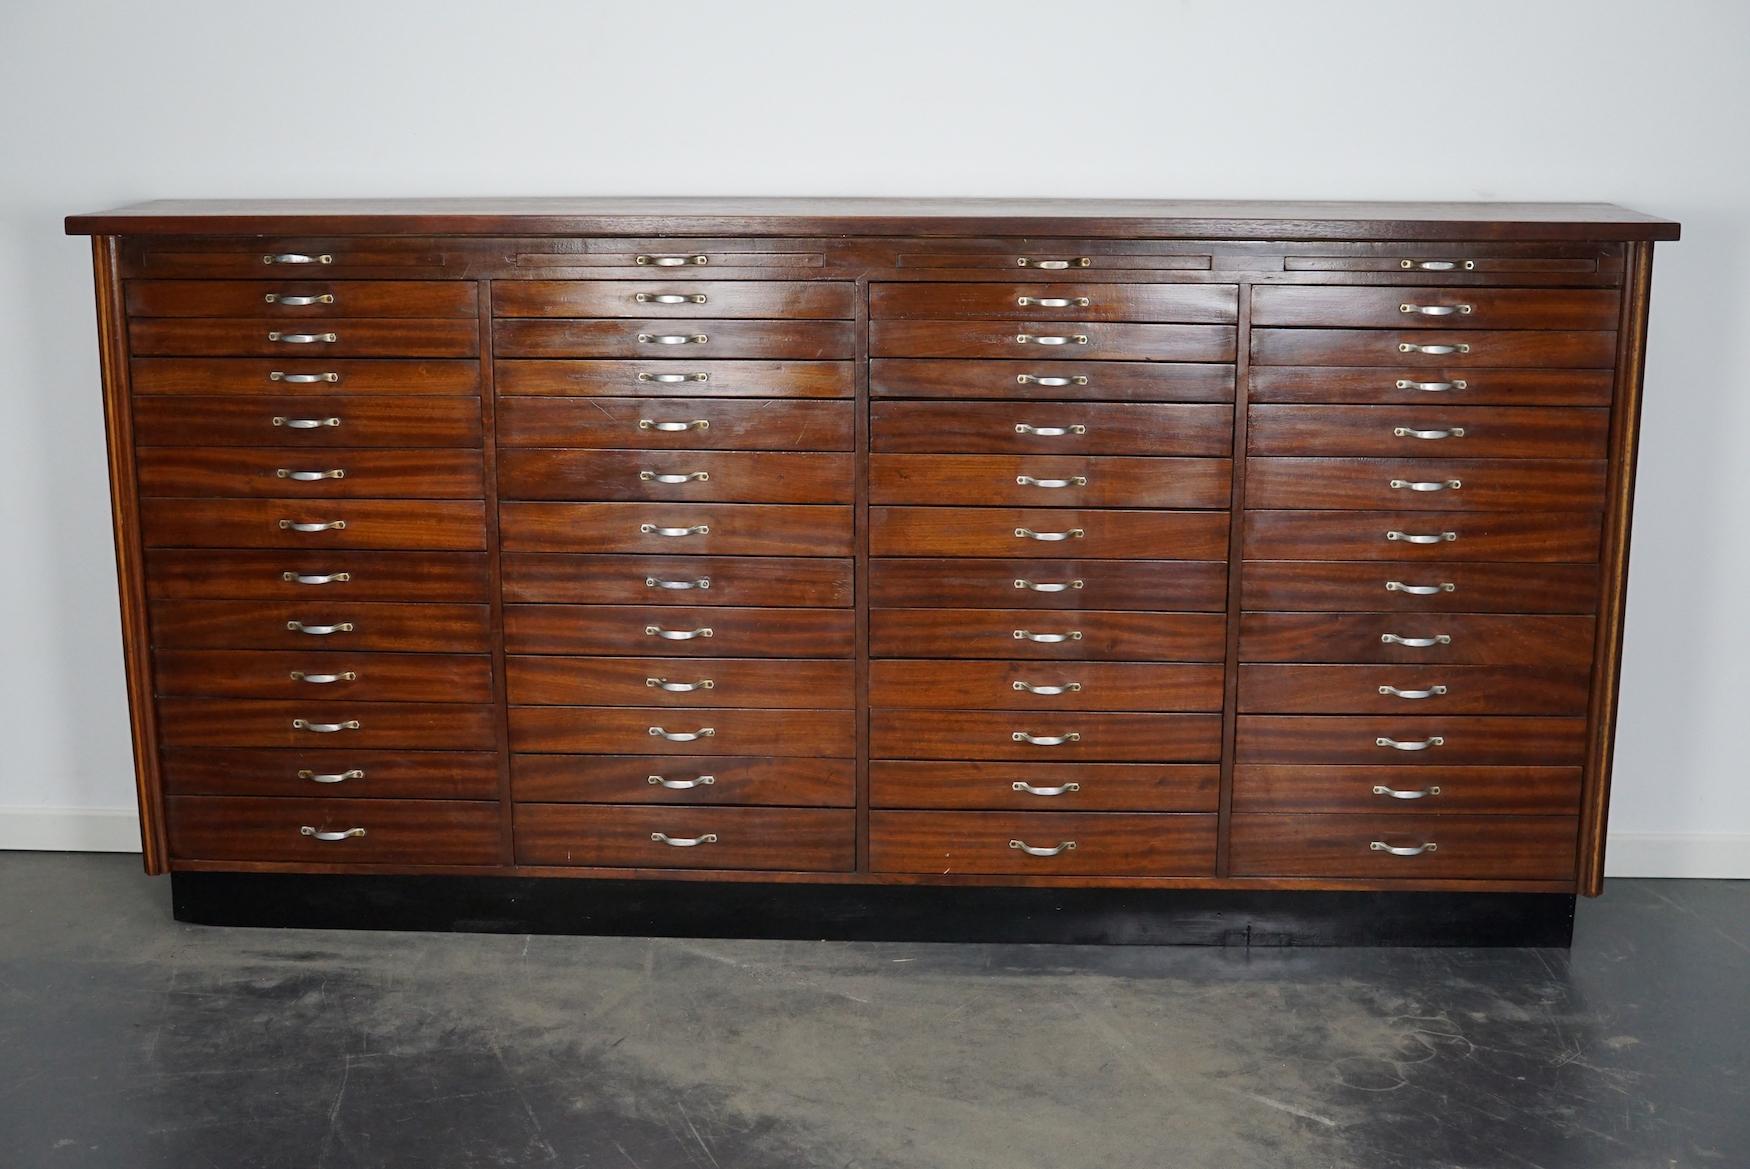 This jewelers / watchmakers cabinet was designed and made circa 1930 in the Netherlands. It features 48 mahogany fronted drawers in three different sizes: DWH 25 x 47 x 3.5 / 5.5 / 8 cm.